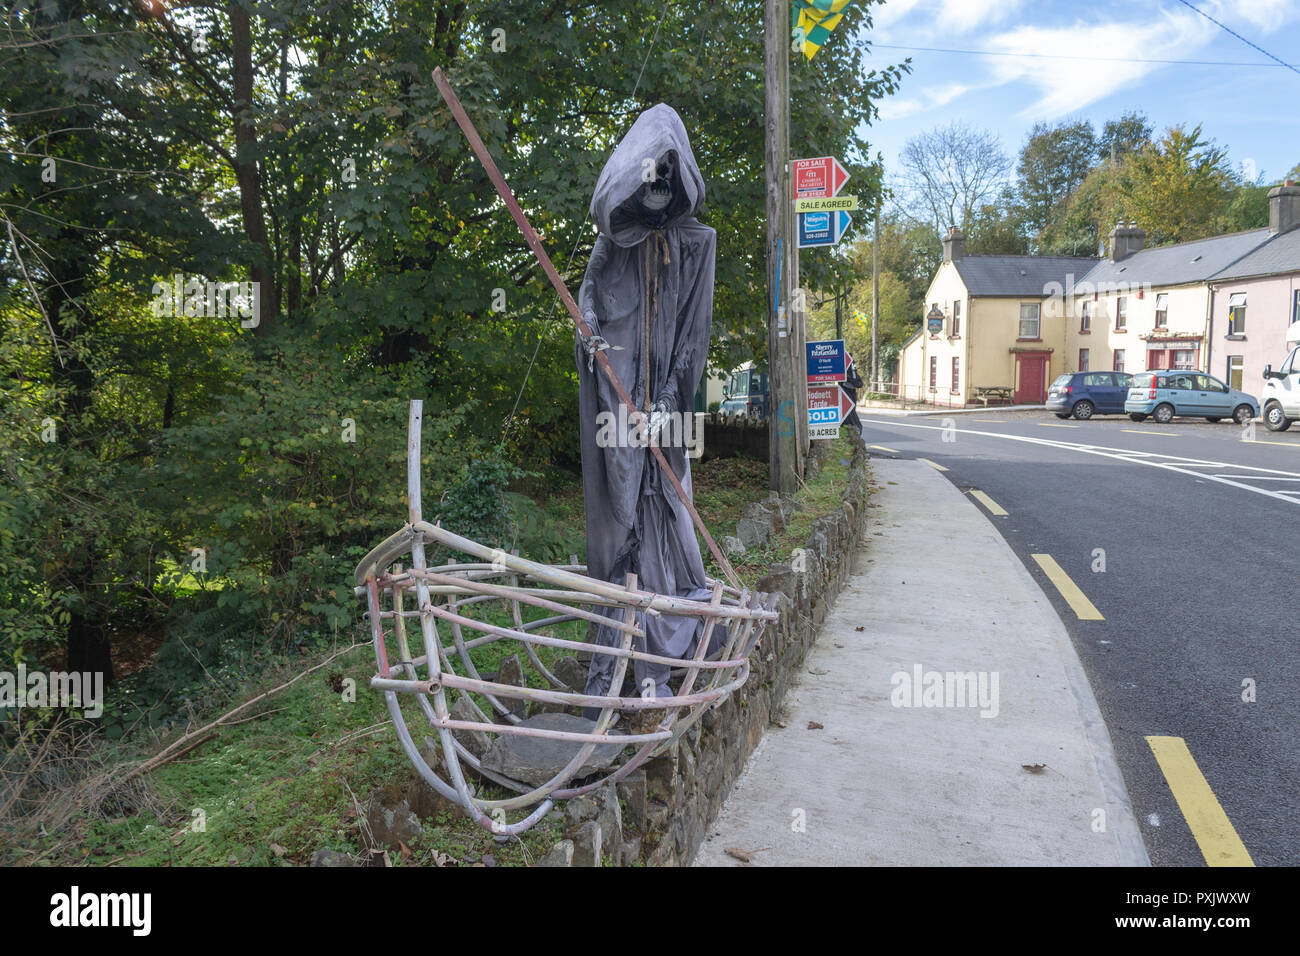 Leap, West Cork, Ireland, October 23rd 2018. Another fine day in West Cork with temperatures reaching 17 Deg. In Leap village scarecrows and ghouls started to appear on the roadside and front gardens as part of the Leap Scarecrow Festival, aiming to make Leap the spookiest place in Ireland. The festival runs from 20th October to 5th November. Credit: aphperspective/Alamy Live News Stock Photo